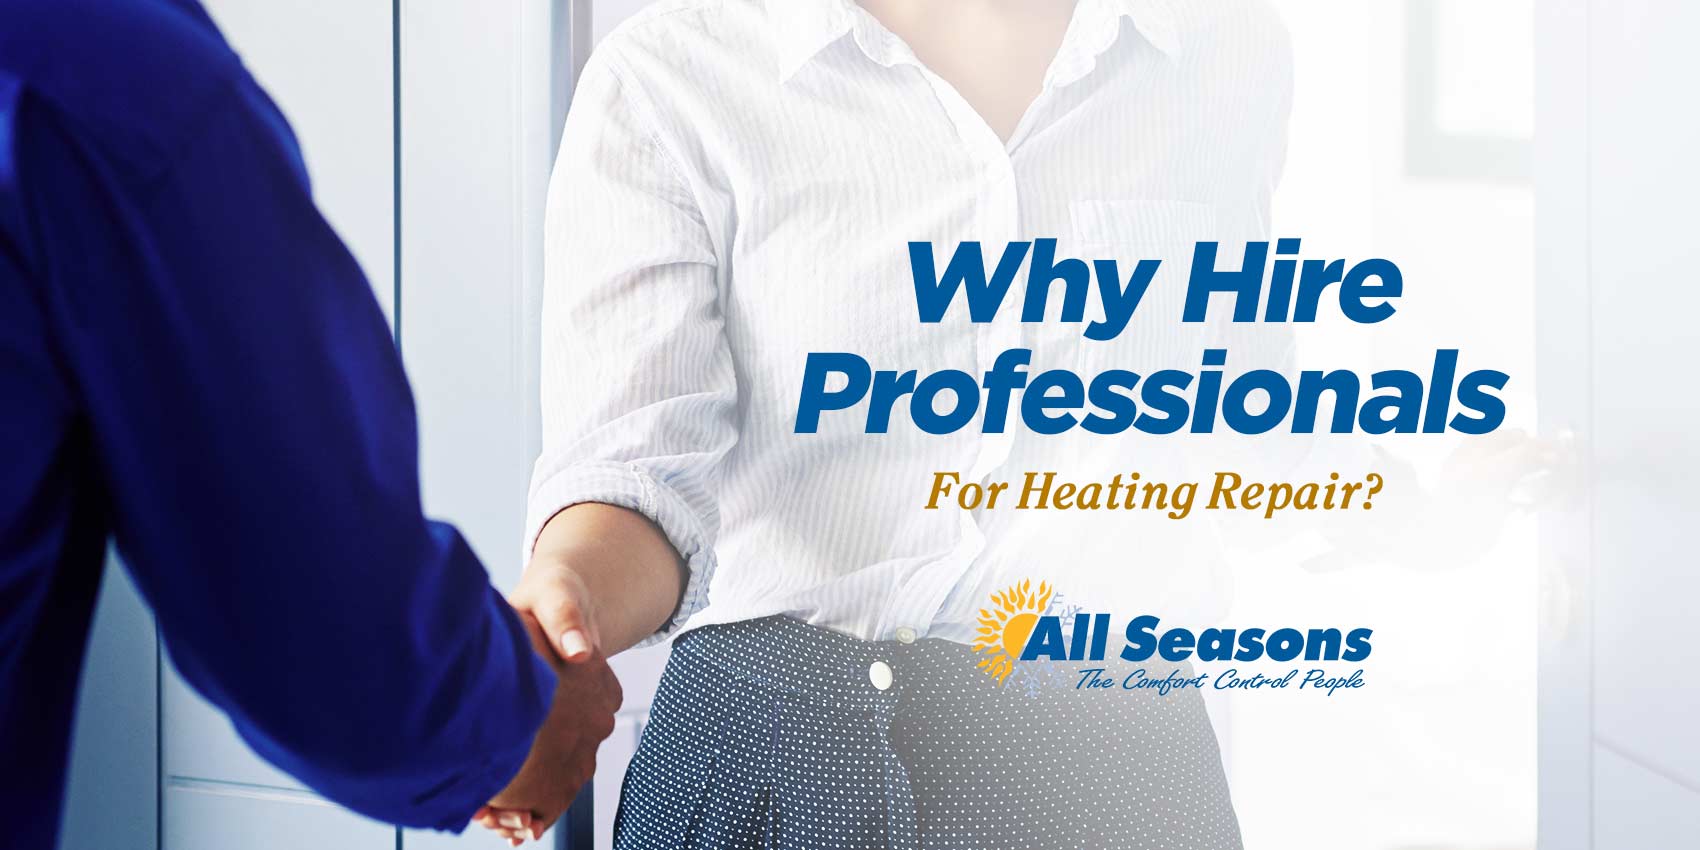 Why Hire Professionals For Heating Repair?